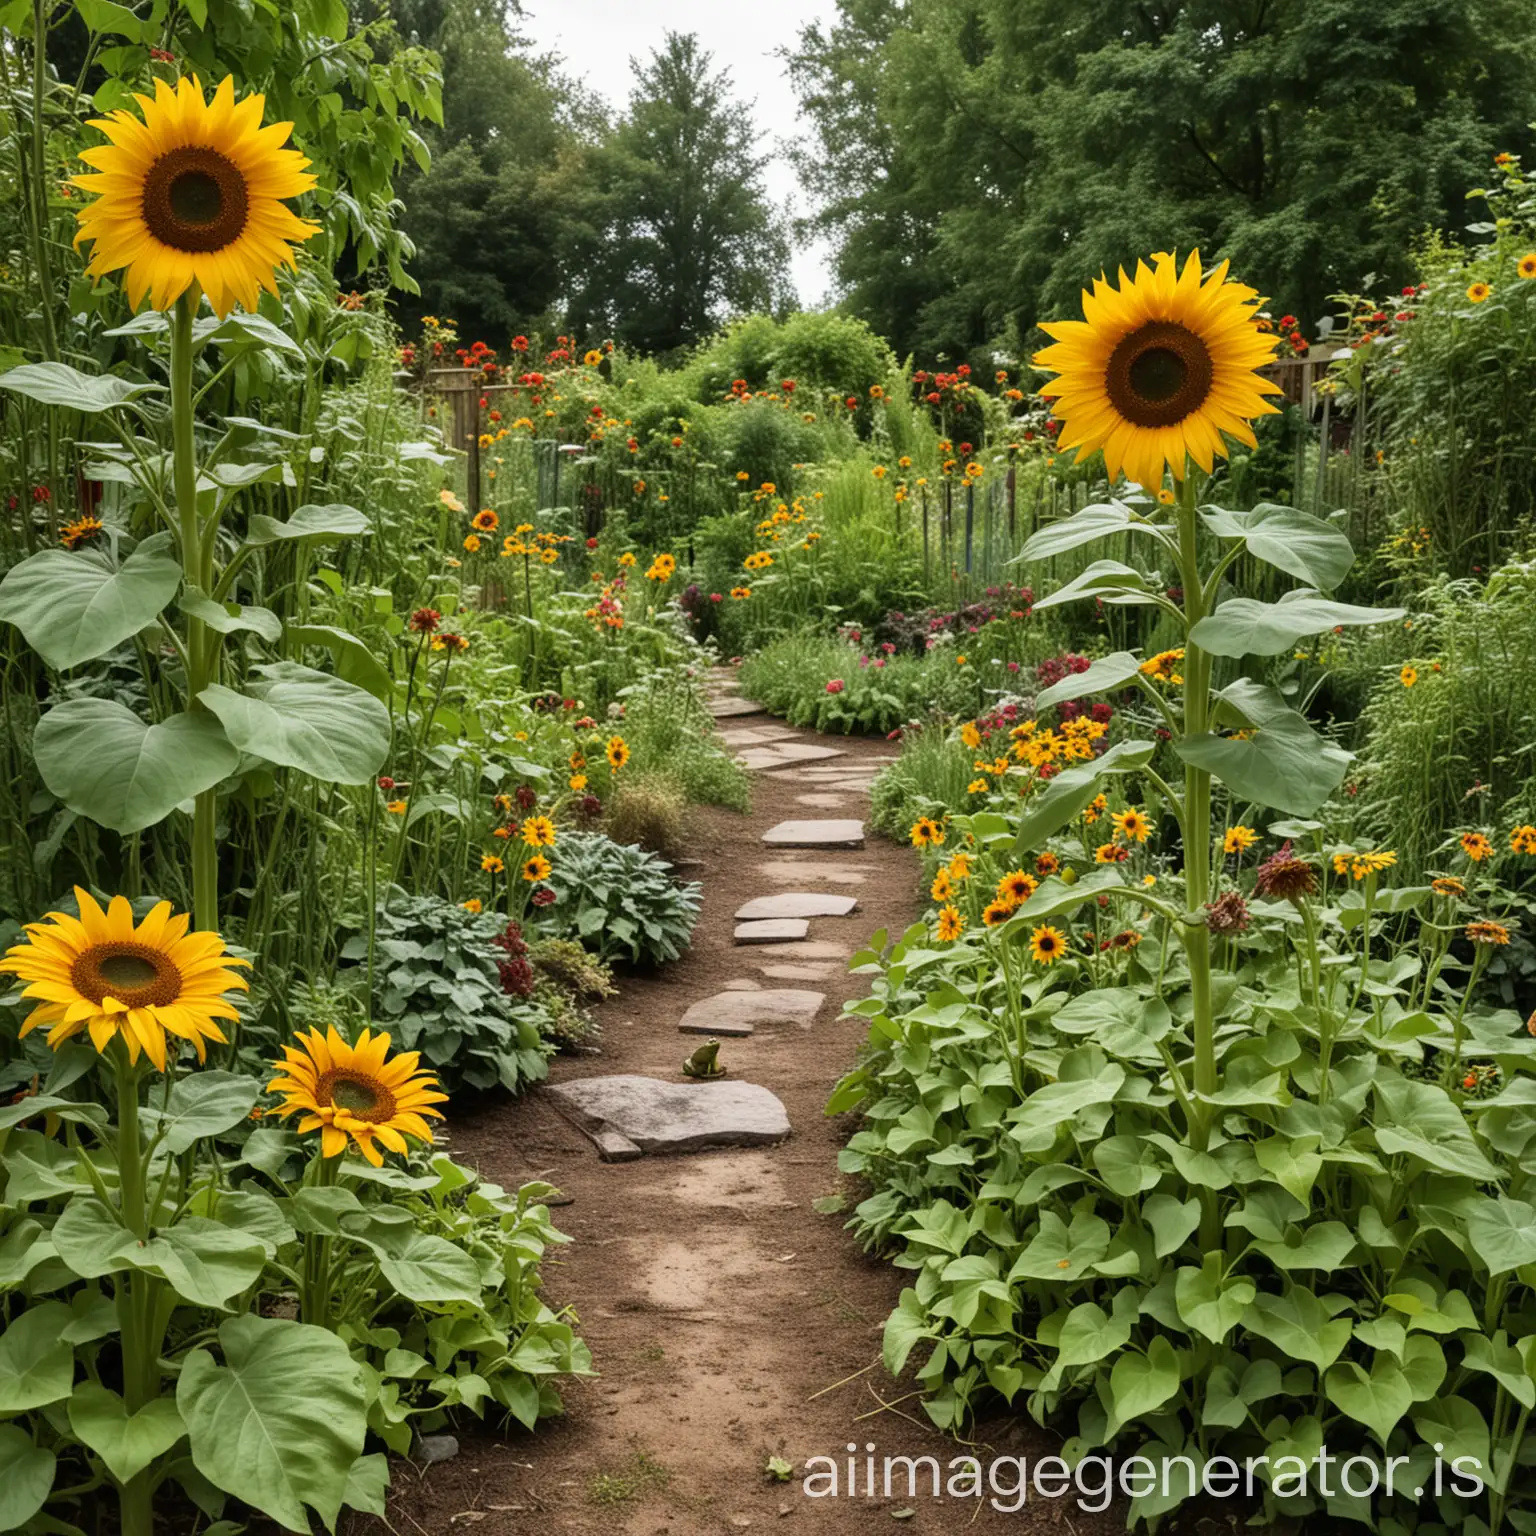 Whimsical-Garden-Scene-with-Playful-Frog-Vibrant-Sunflowers-and-Lush-Plants